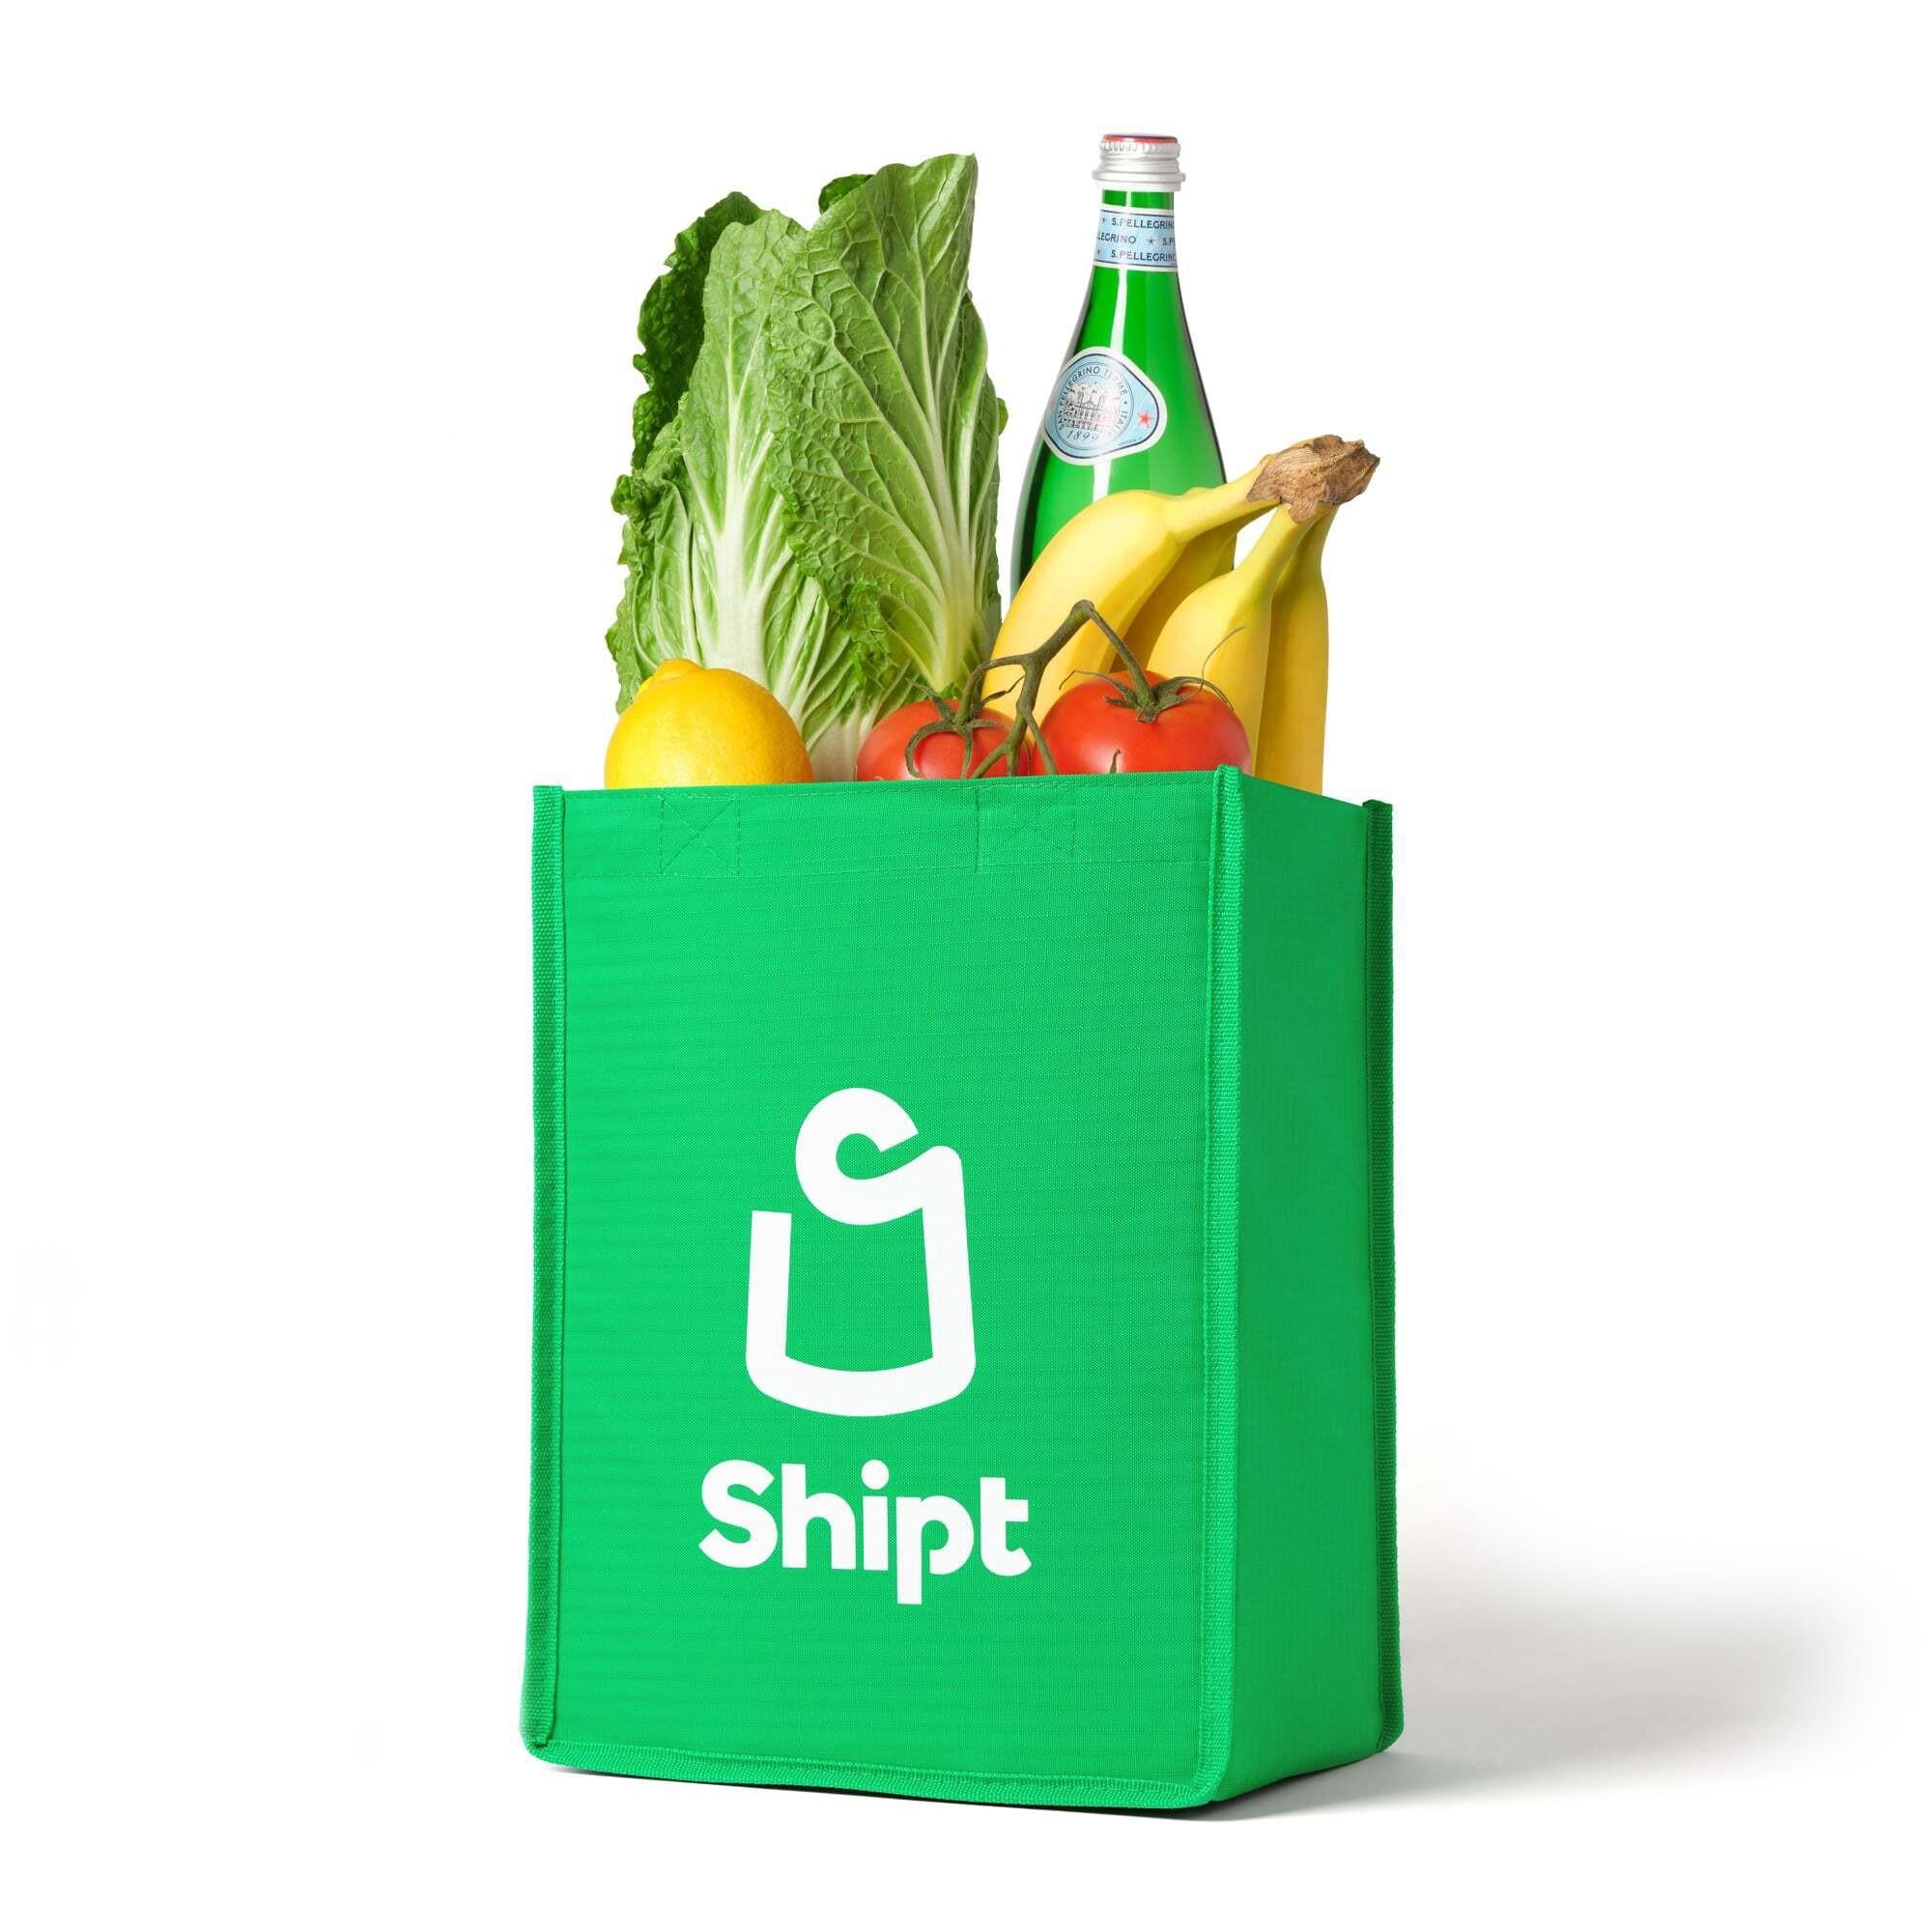 Bag of groceries from Shipt